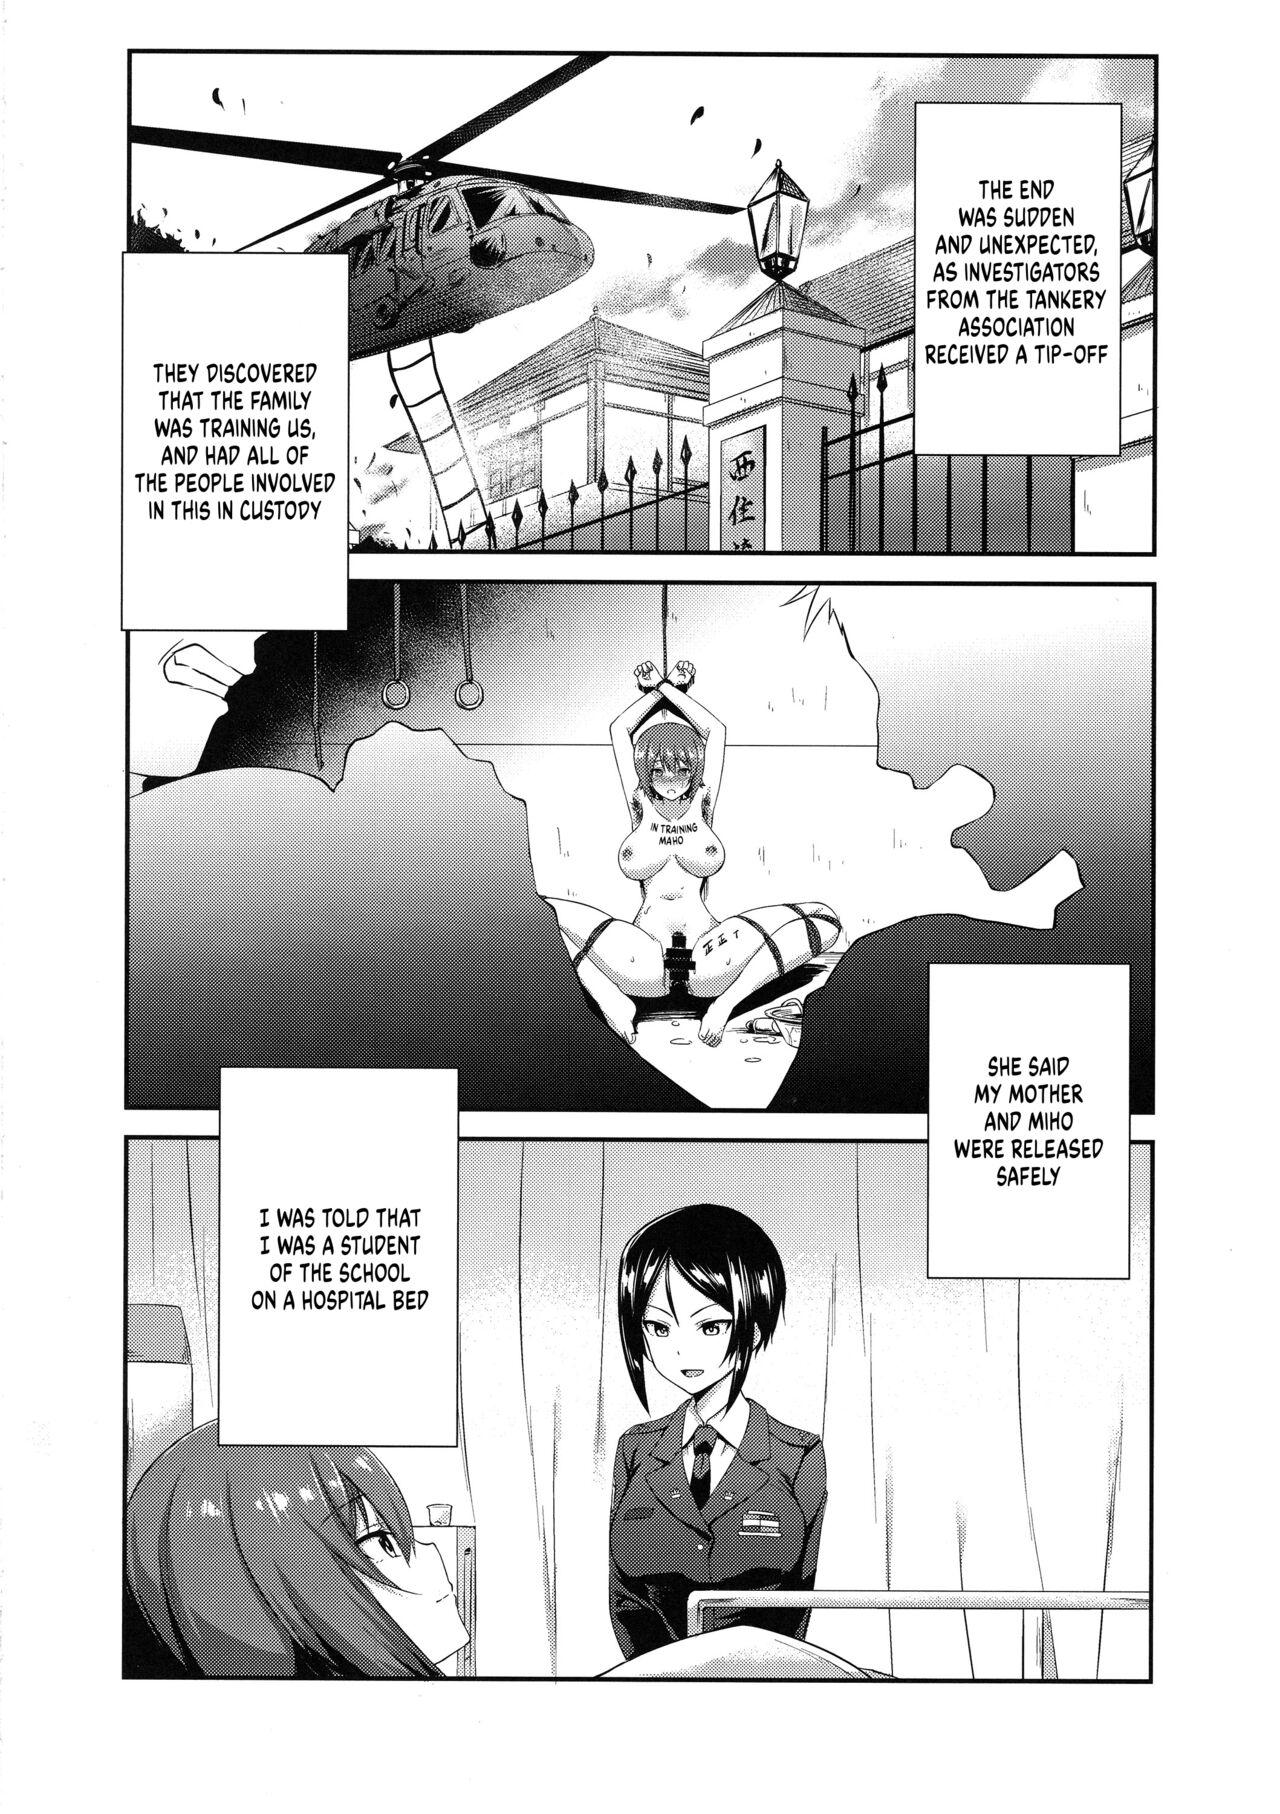 Pelada The Way How a Matriarch is Brought Up - Maho's Case, Top - Girls und panzer Fetish - Page 5